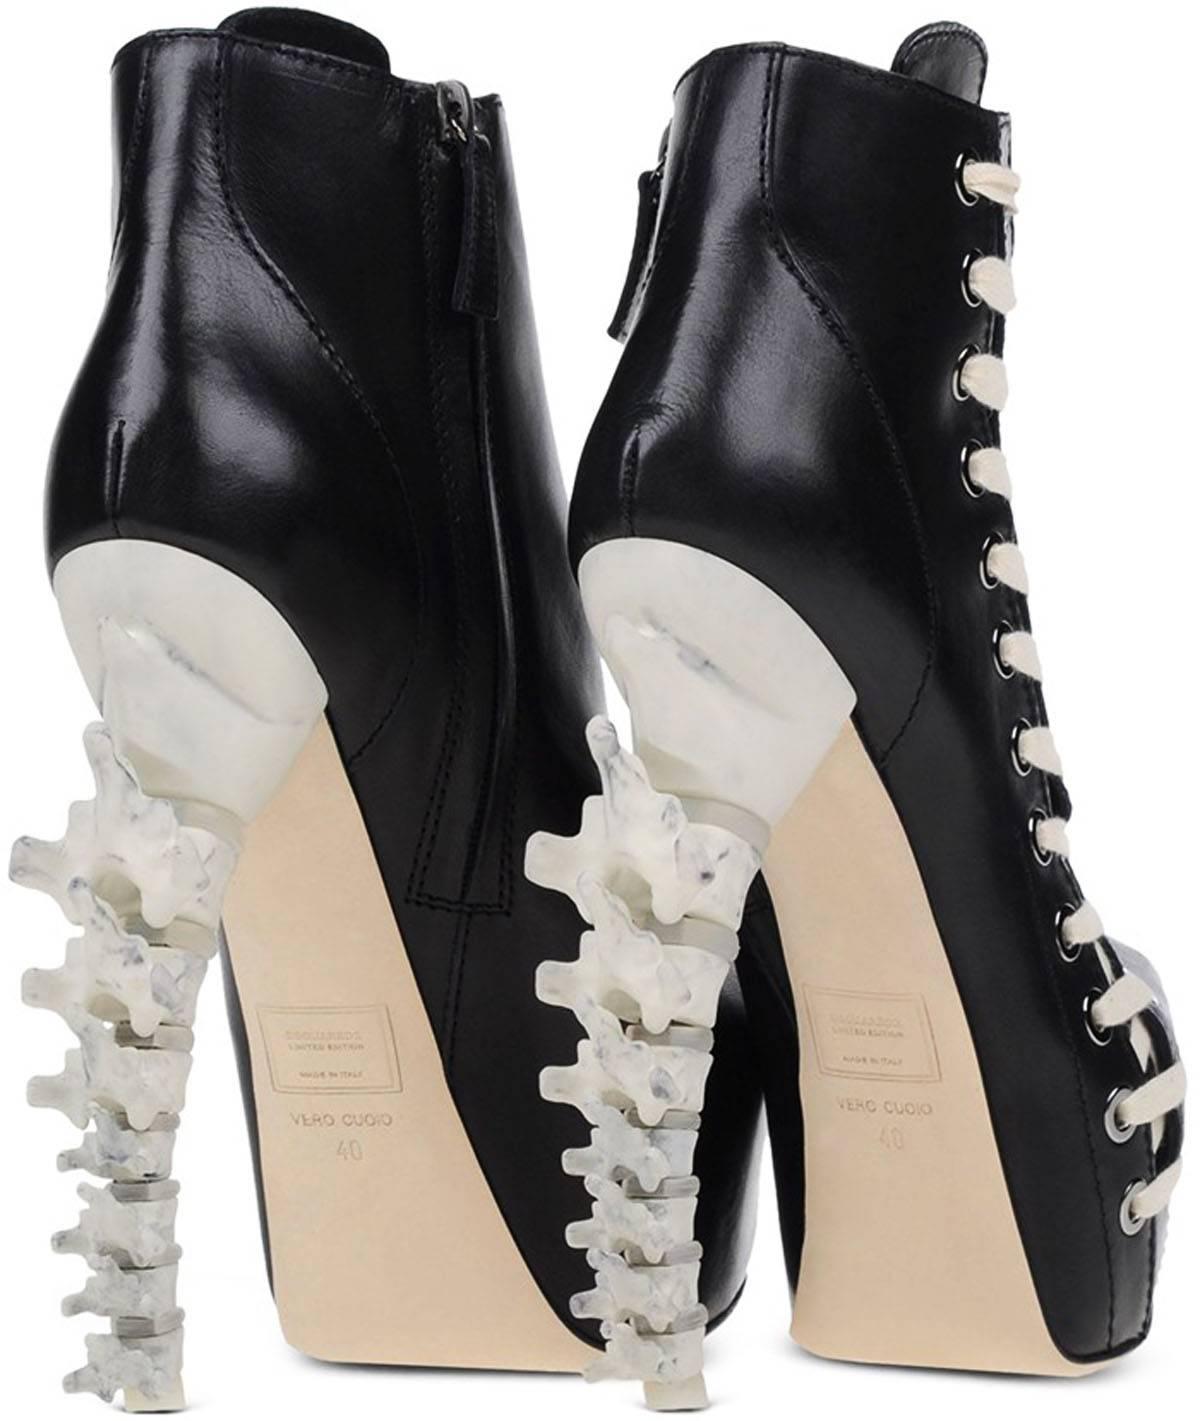 New Dsquared2 Limited Edition Icon Spine Heel Leather Ankle Booties
 Italian sizes available 39 - US 9
 Color - Black
 100% Leather
 Faux Laces Along the Side
 Zip Closure on Side
 Hidden Platform - 2 inches
 Faux Bone Heel - 6 inches
 Shaft - 5.5